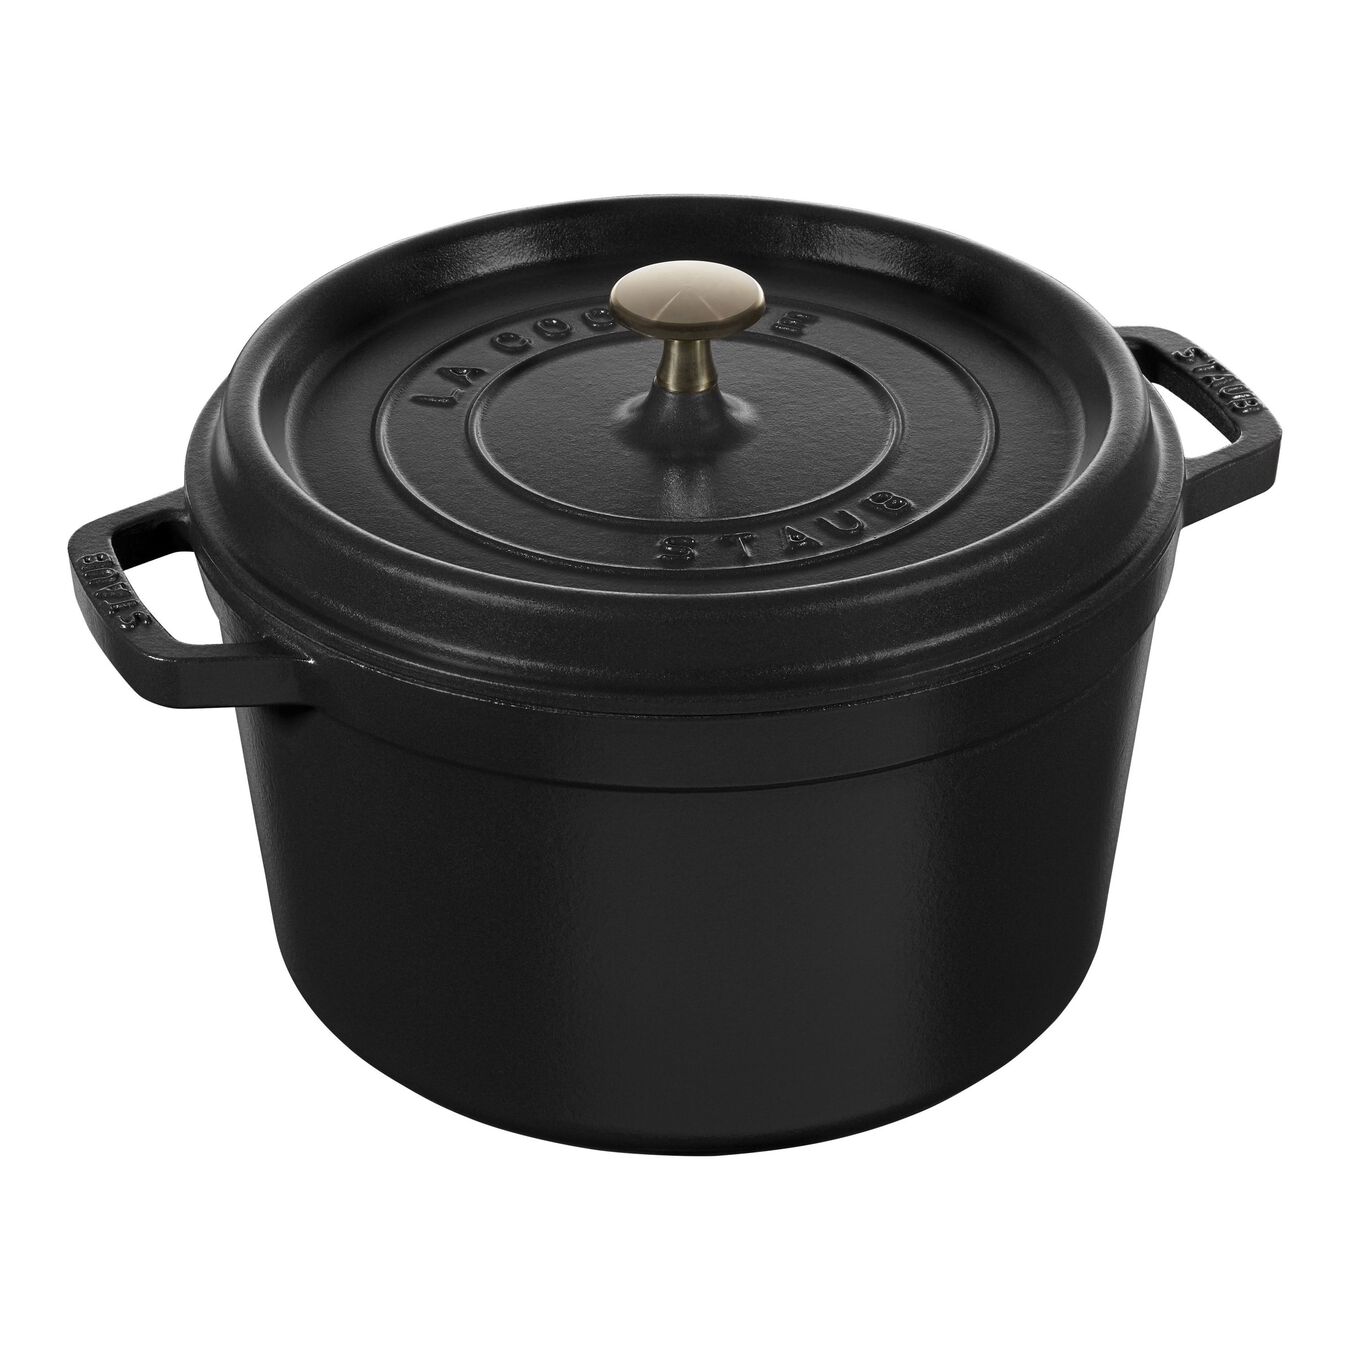 4.75 l cast iron round Tall cocotte, black - Visual Imperfections,,large 1